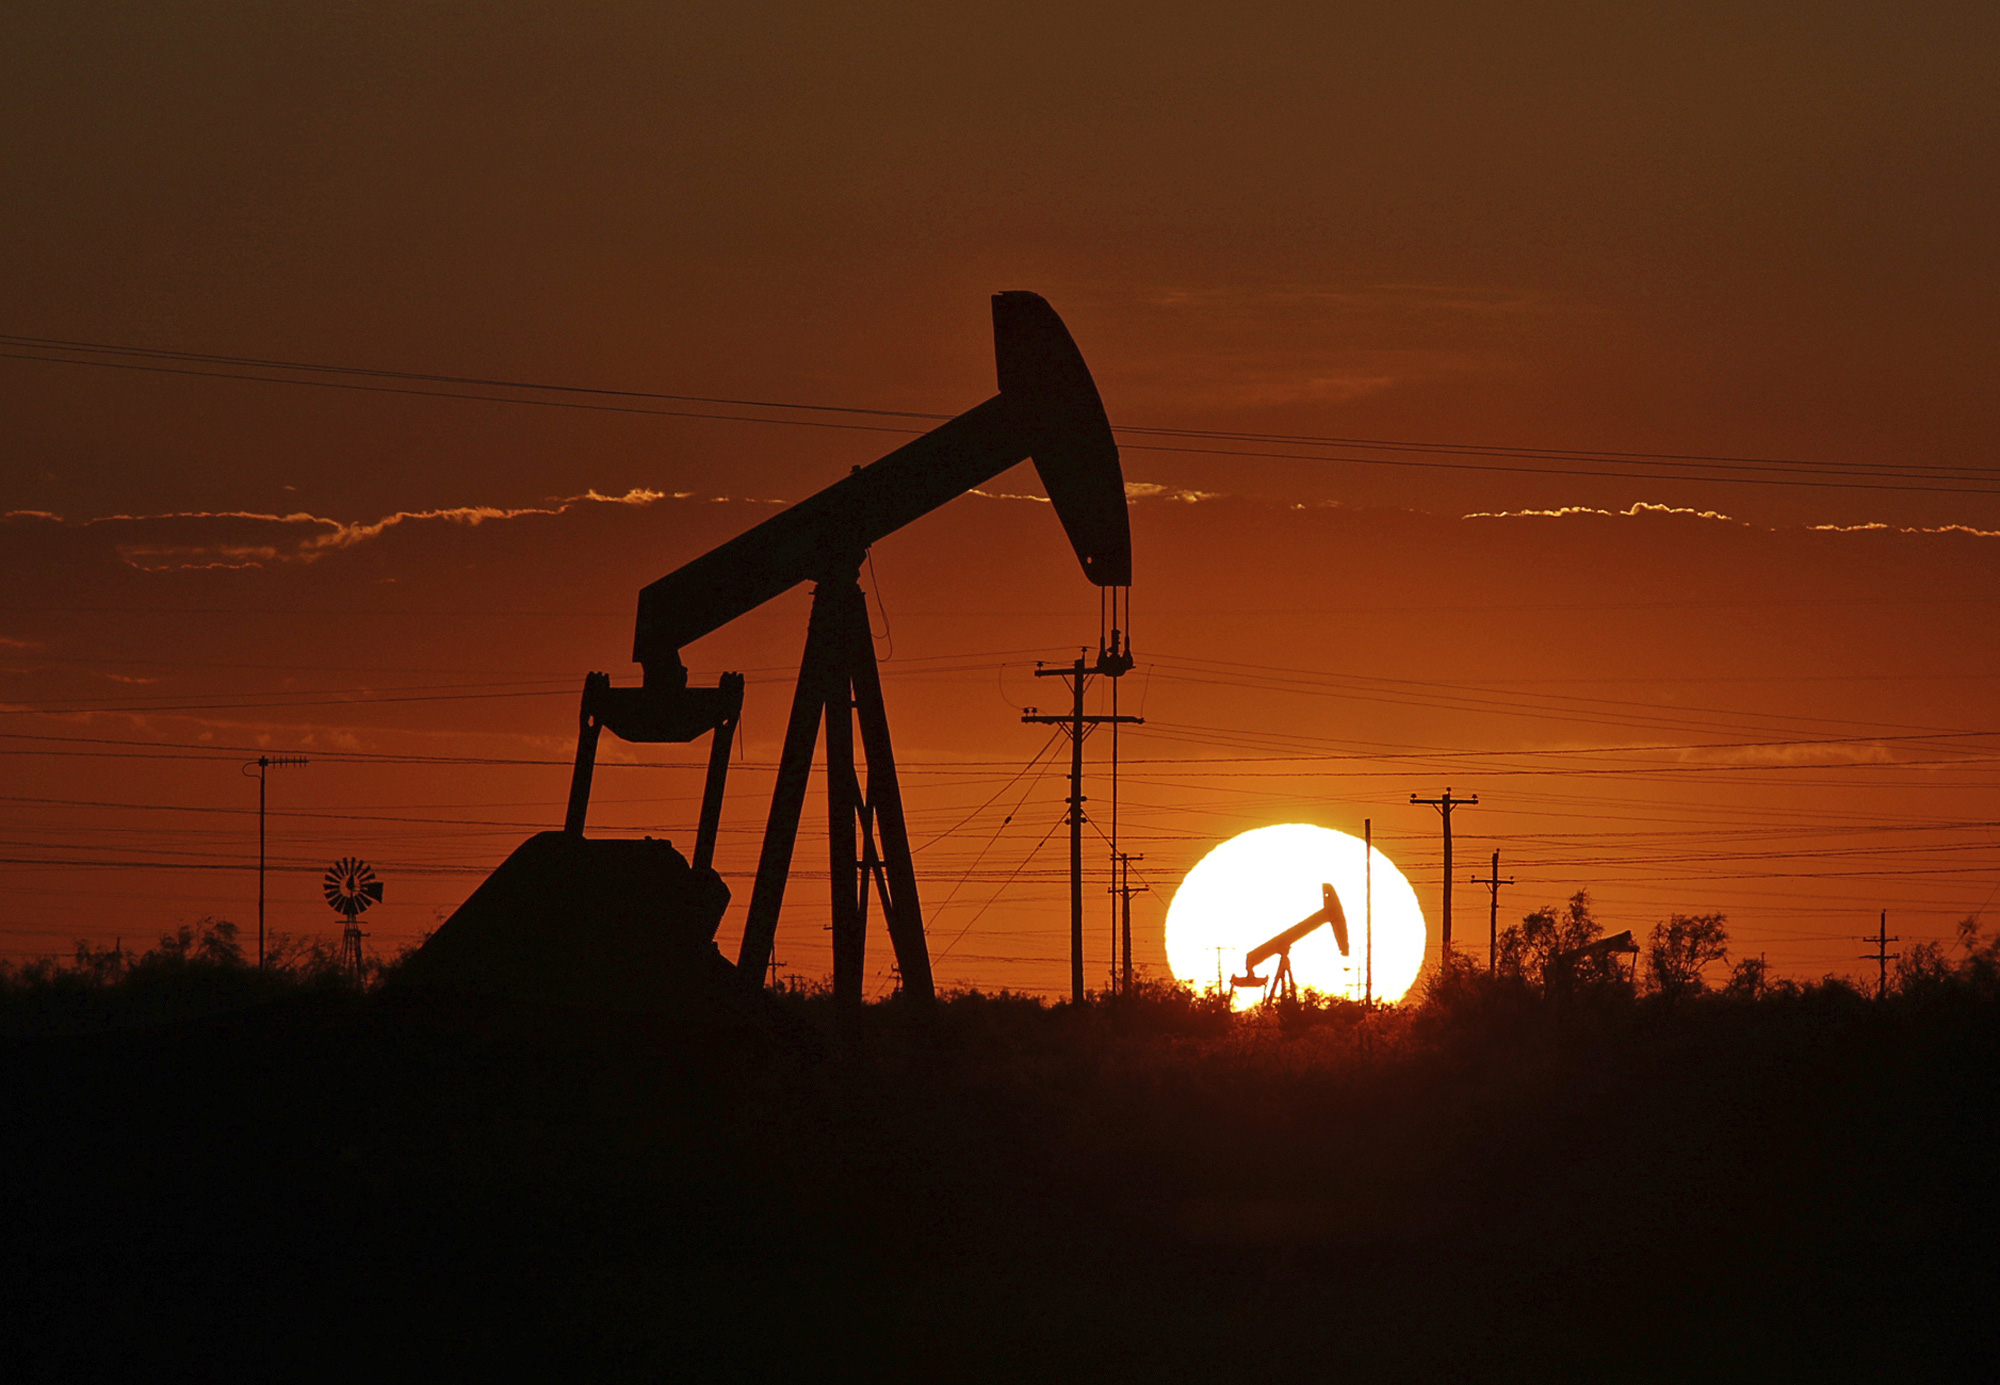 A pump jack operates in an oil field in the Permian Basin in Texas.